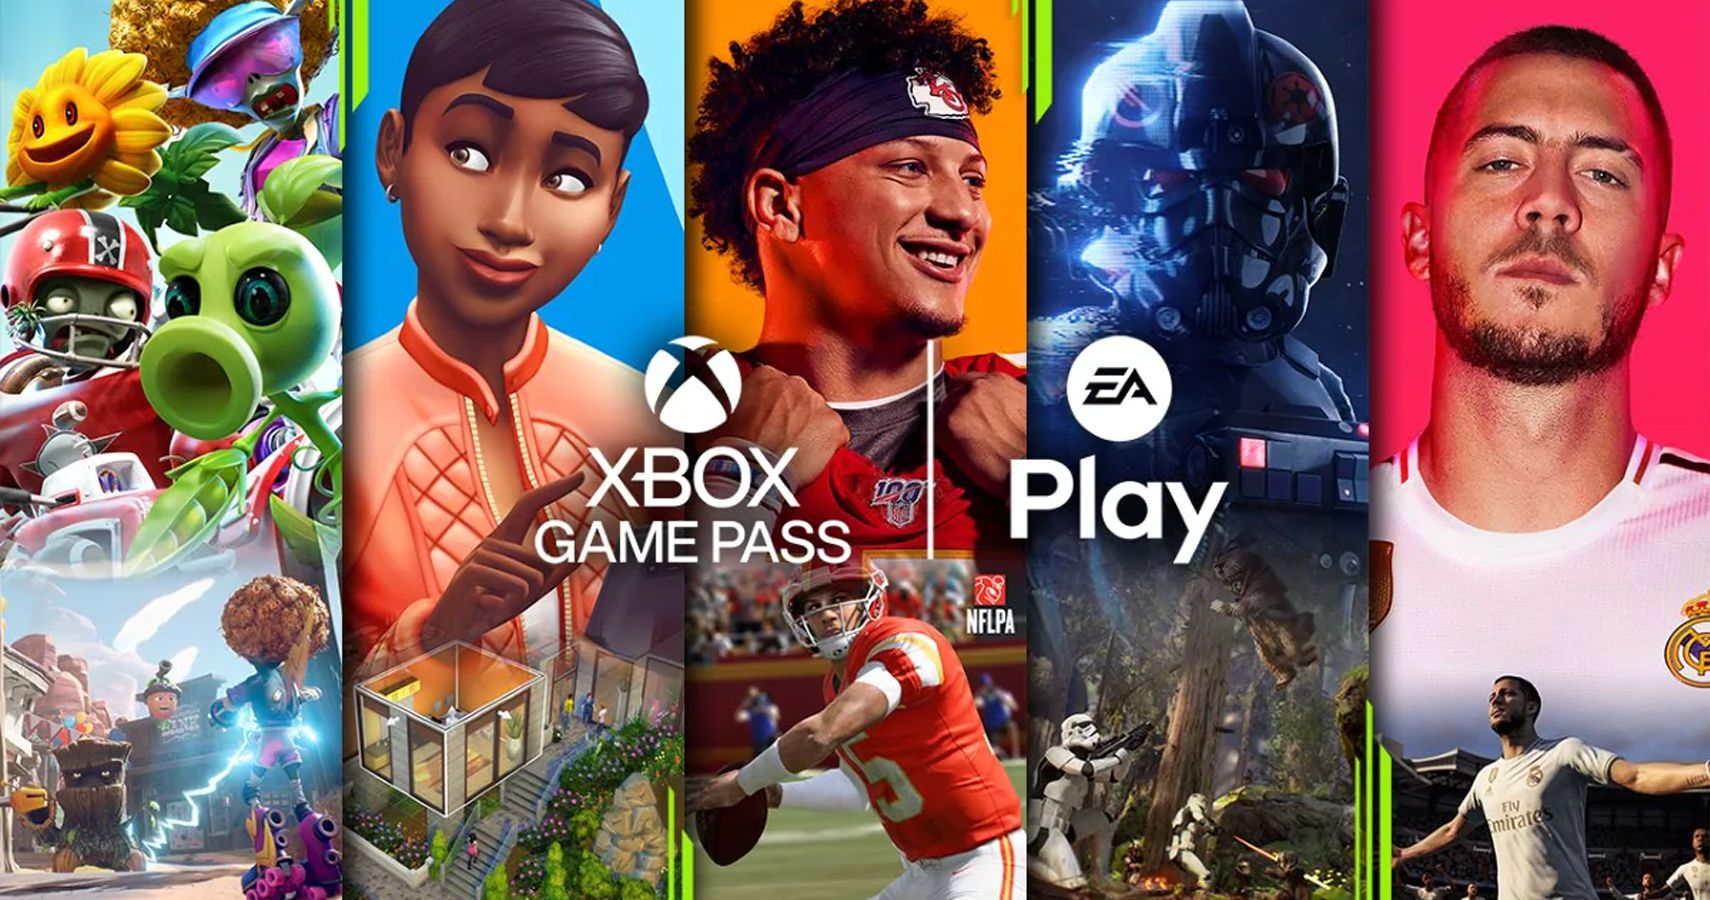 Microsoft States EA Play Isnt Leaving Game Pass Ultimate Anytime Soon